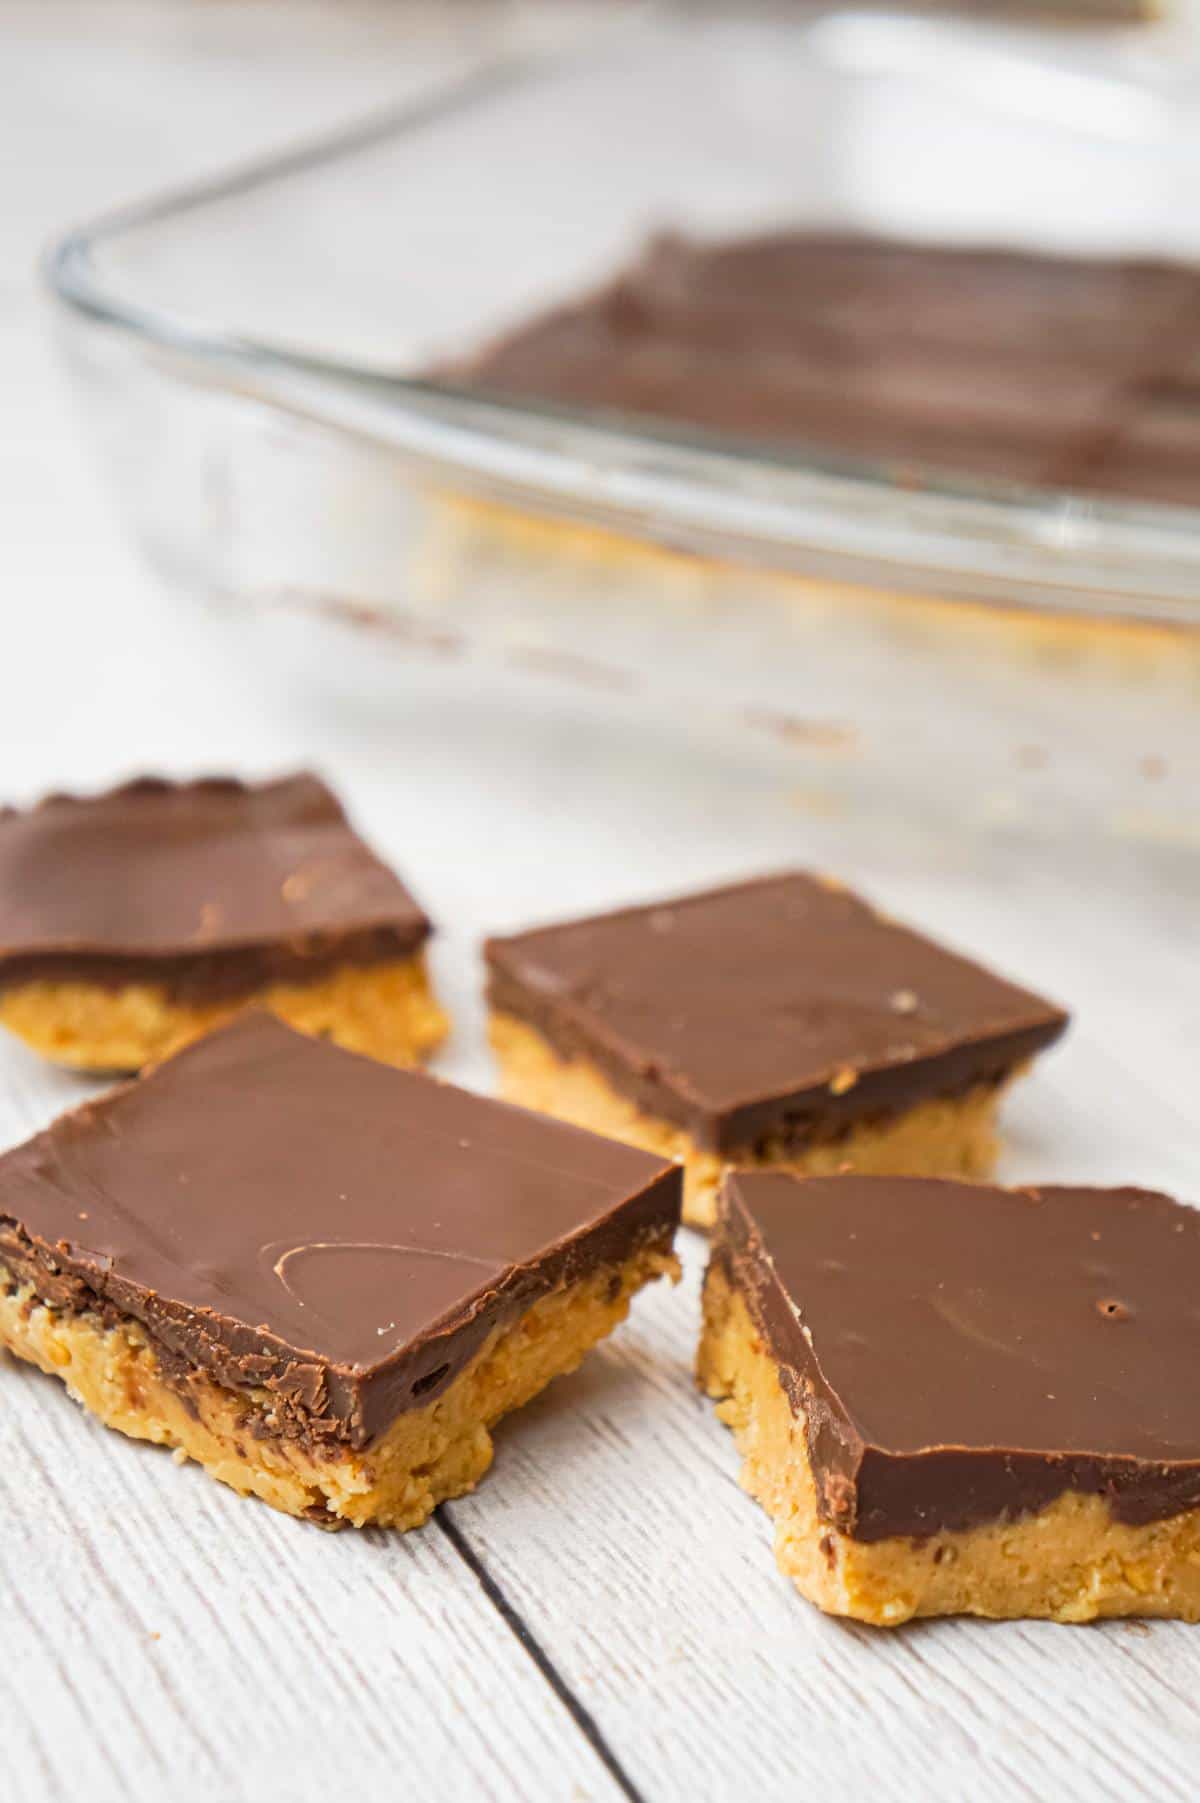 No Bake Peanut Butter Bars are tasty treats with a peanut butter and Ritz cracker crumb base and topped with chocolate.